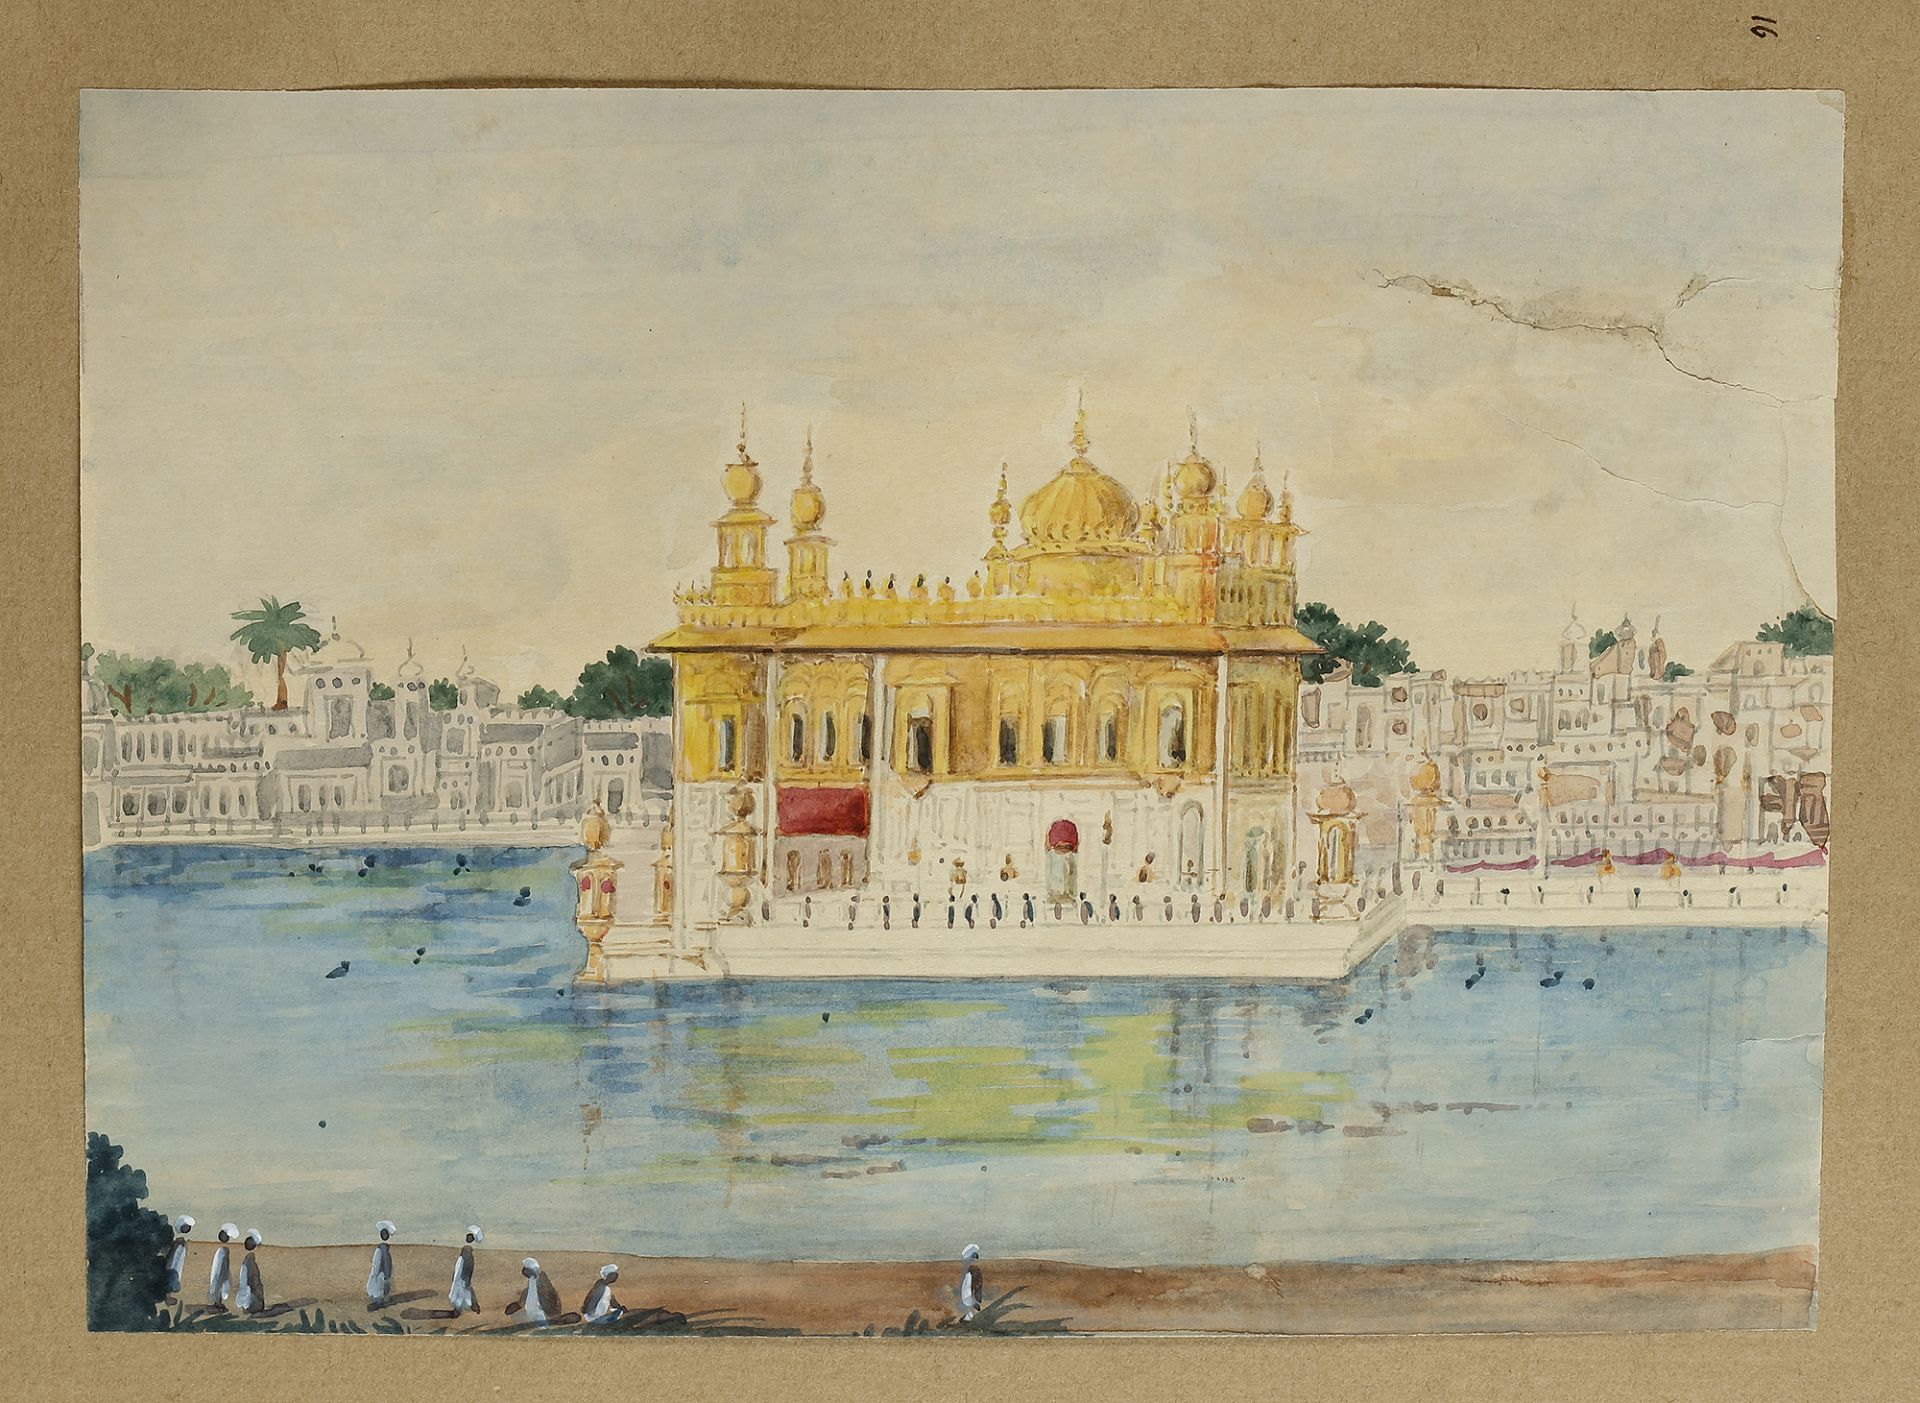 VIEWS OF THE GOLDEN TEMPLE AT AMRITSAR EUROPEAN SCHOOL, 19TH CENTURY - Image 3 of 10